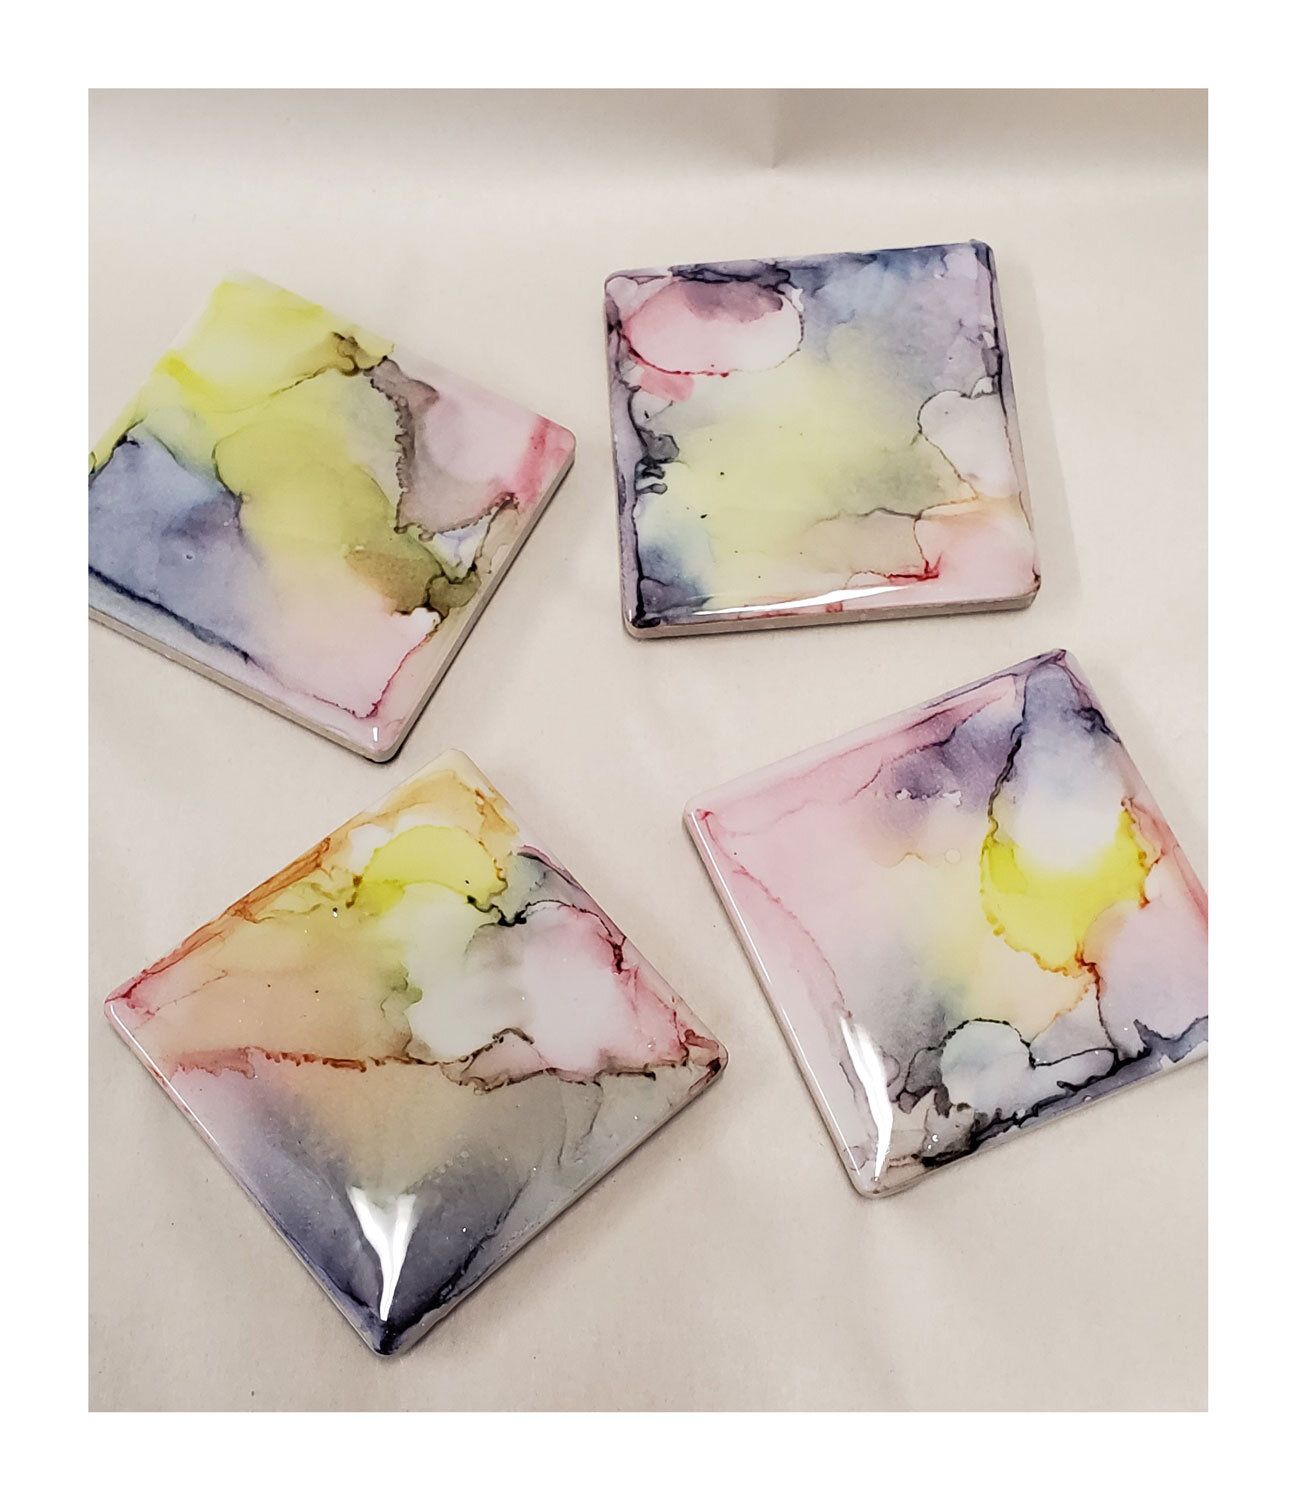 Handmade Tile Coasters gold and white Alcohol Ink Art Coasters Drink Coasters Pink Ceramic Coasters brown Gift for Home or Office